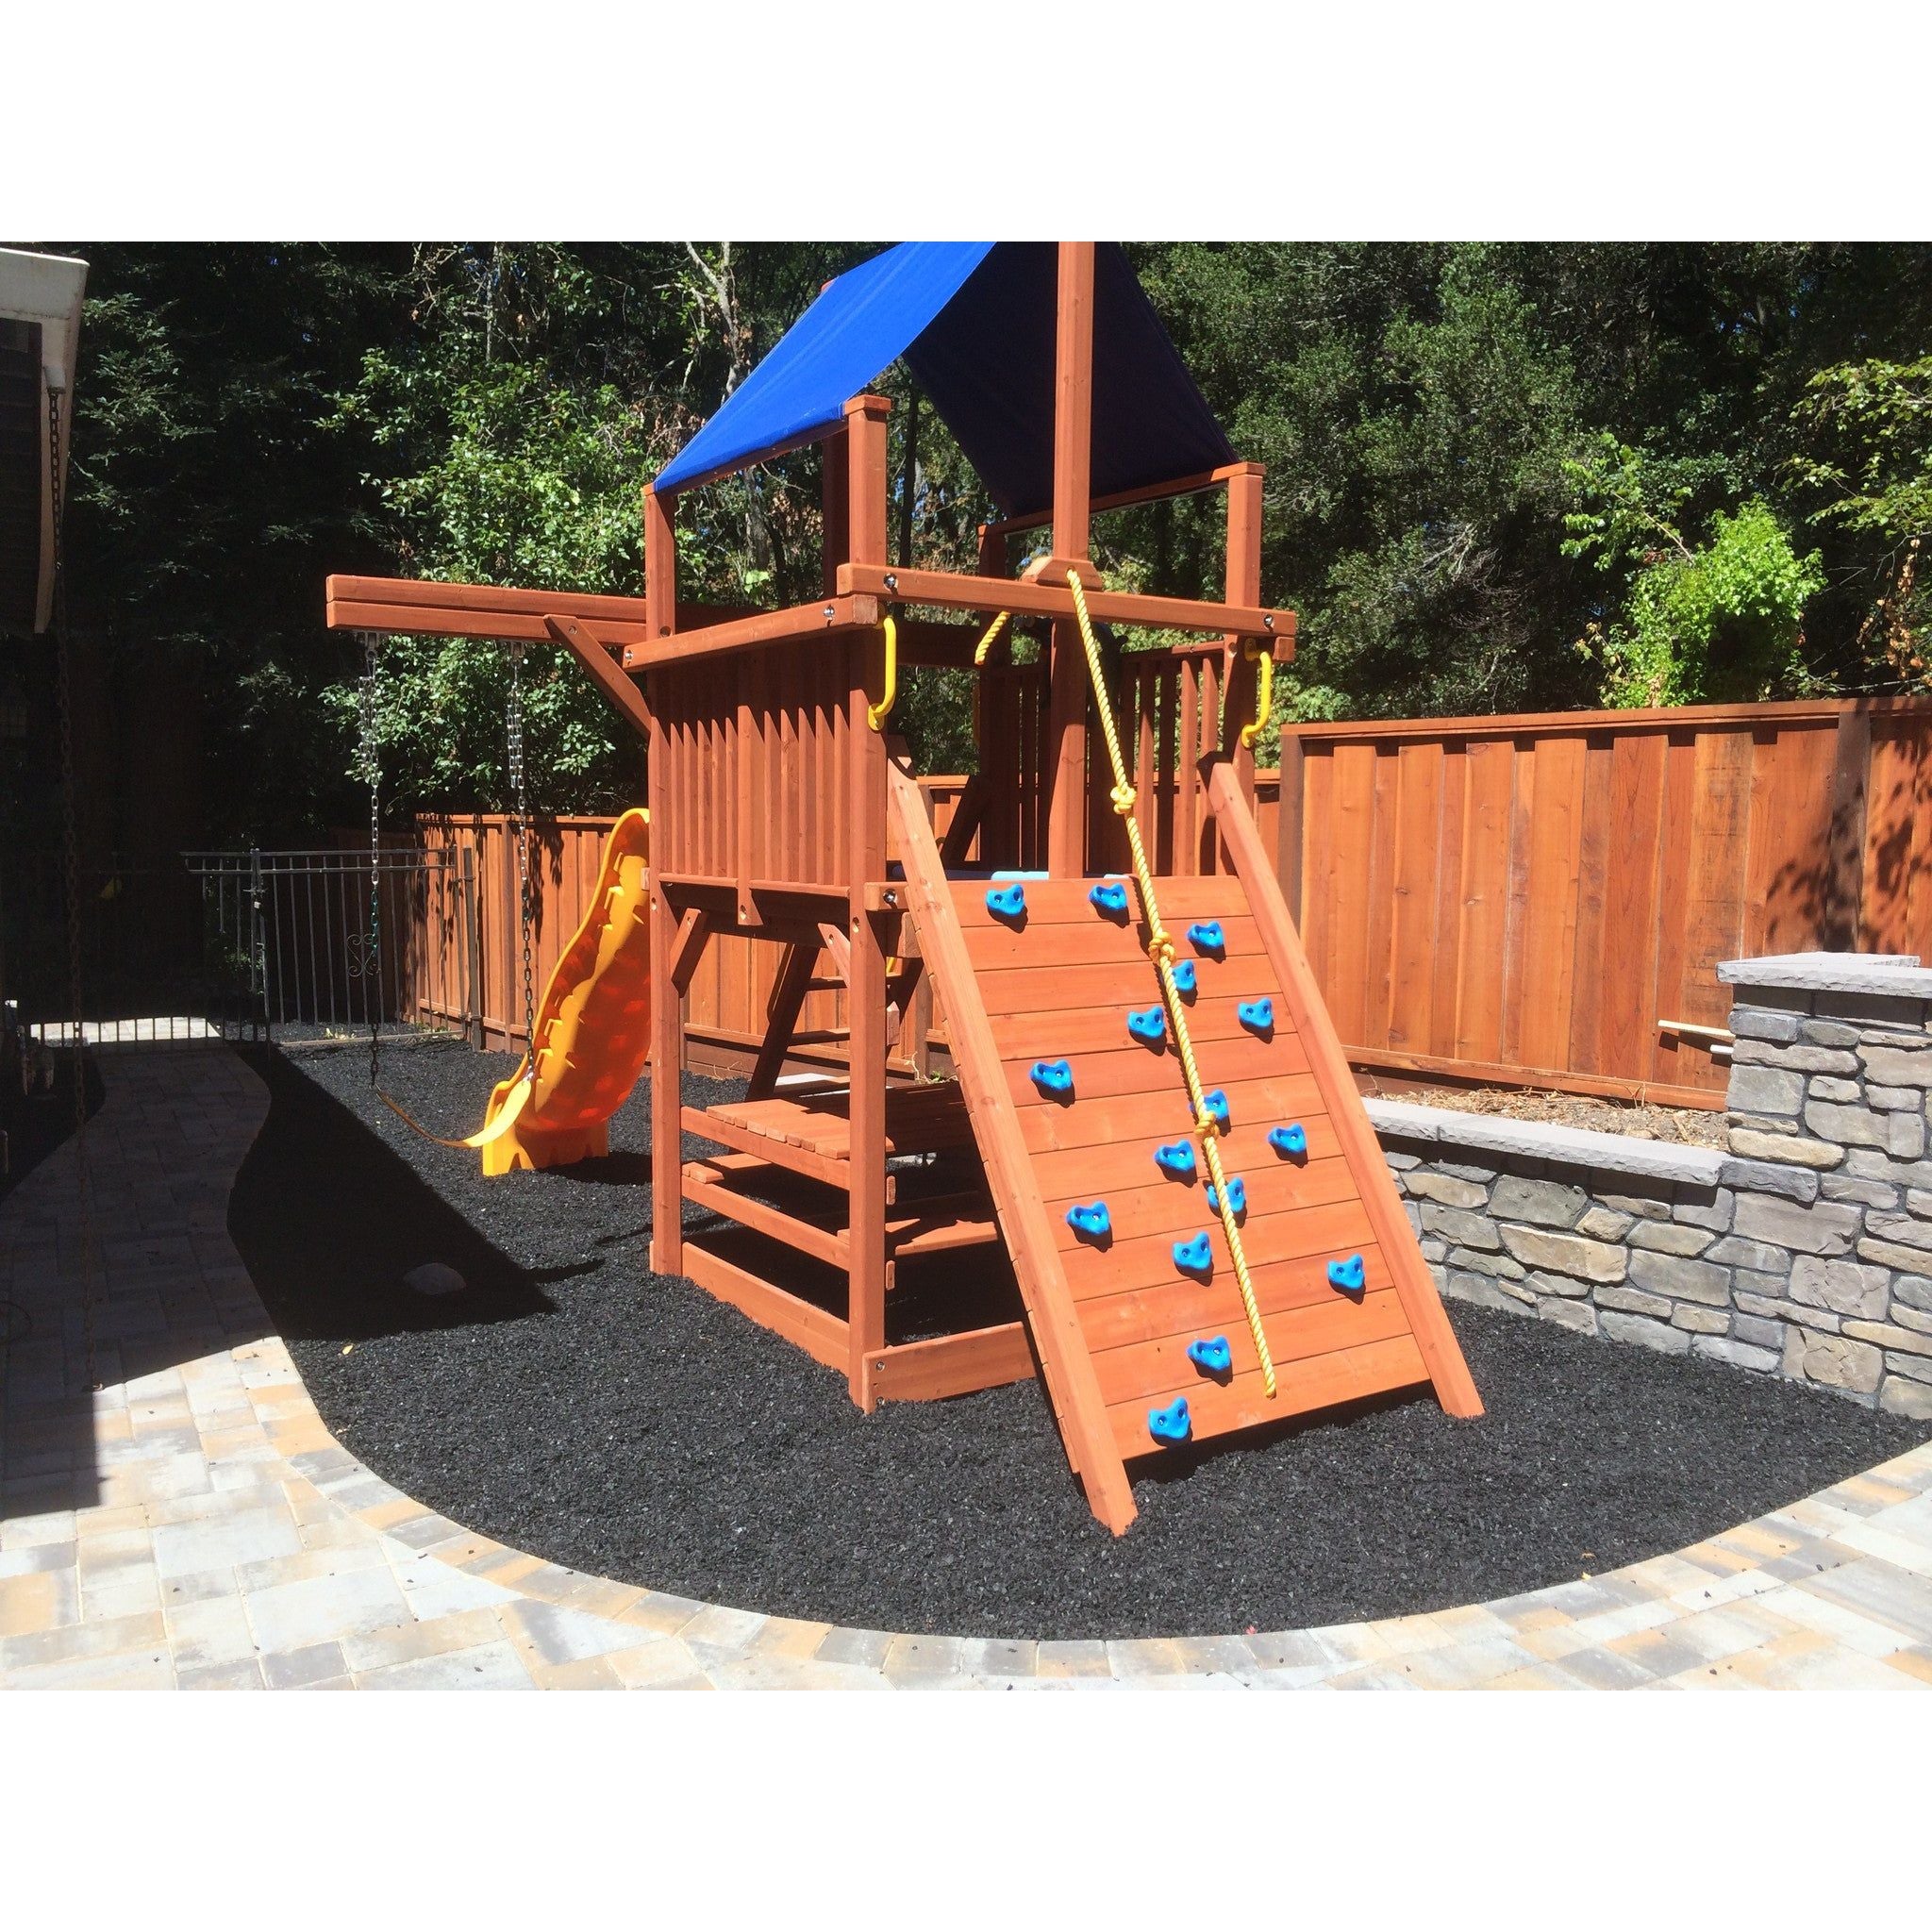 Image of Black rubber mulch in a playground